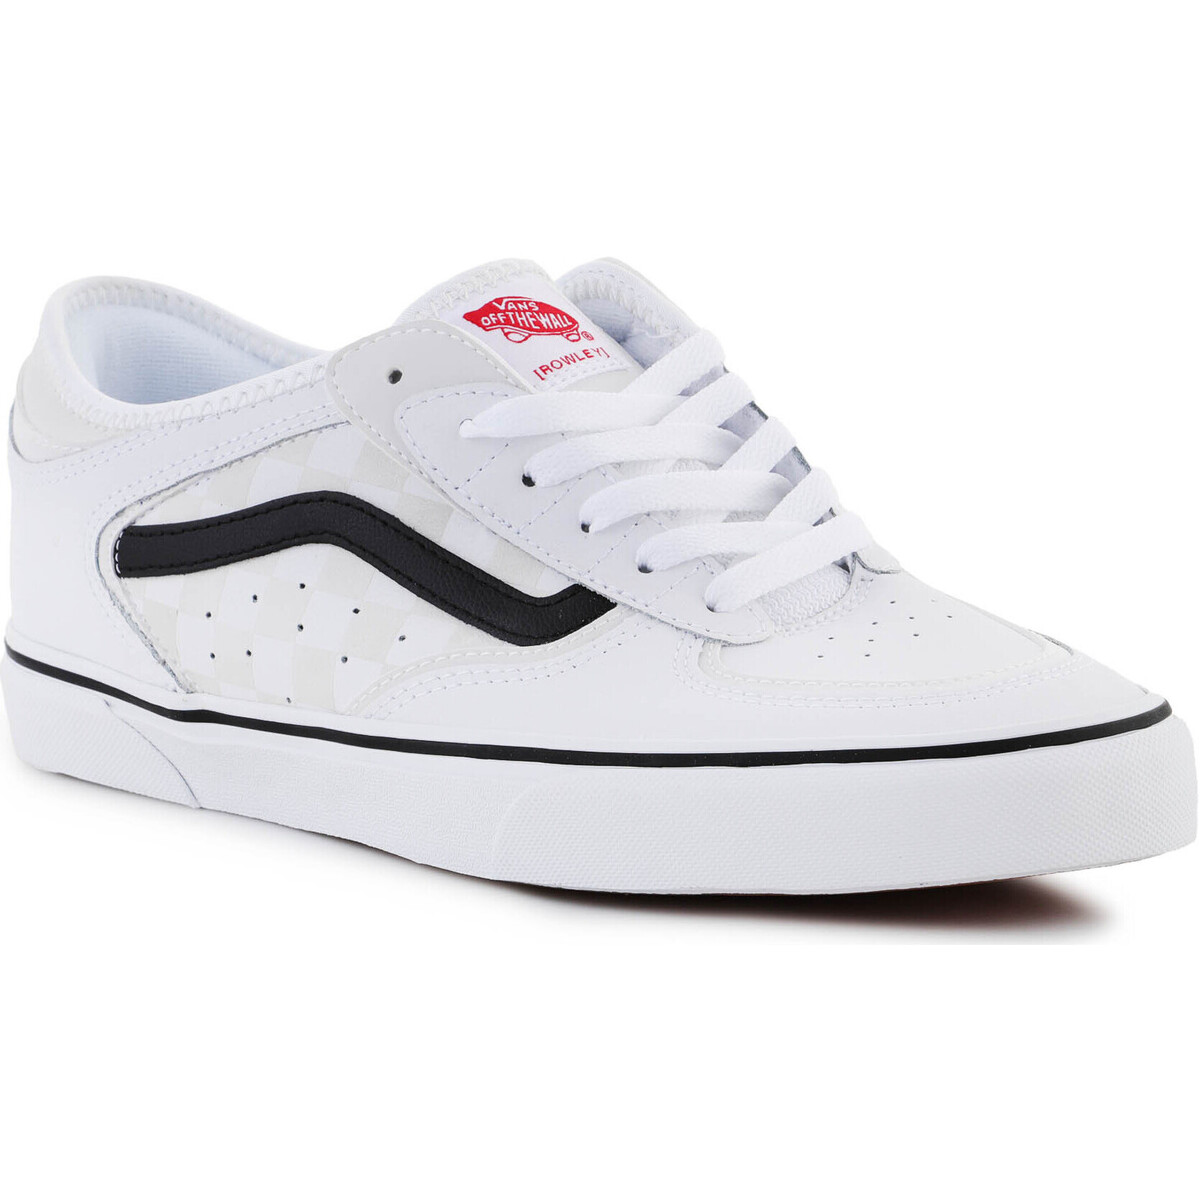 Xαμηλά Sneakers Vans ROWLEY CLASSIC WHITE VN0A4BTTW691